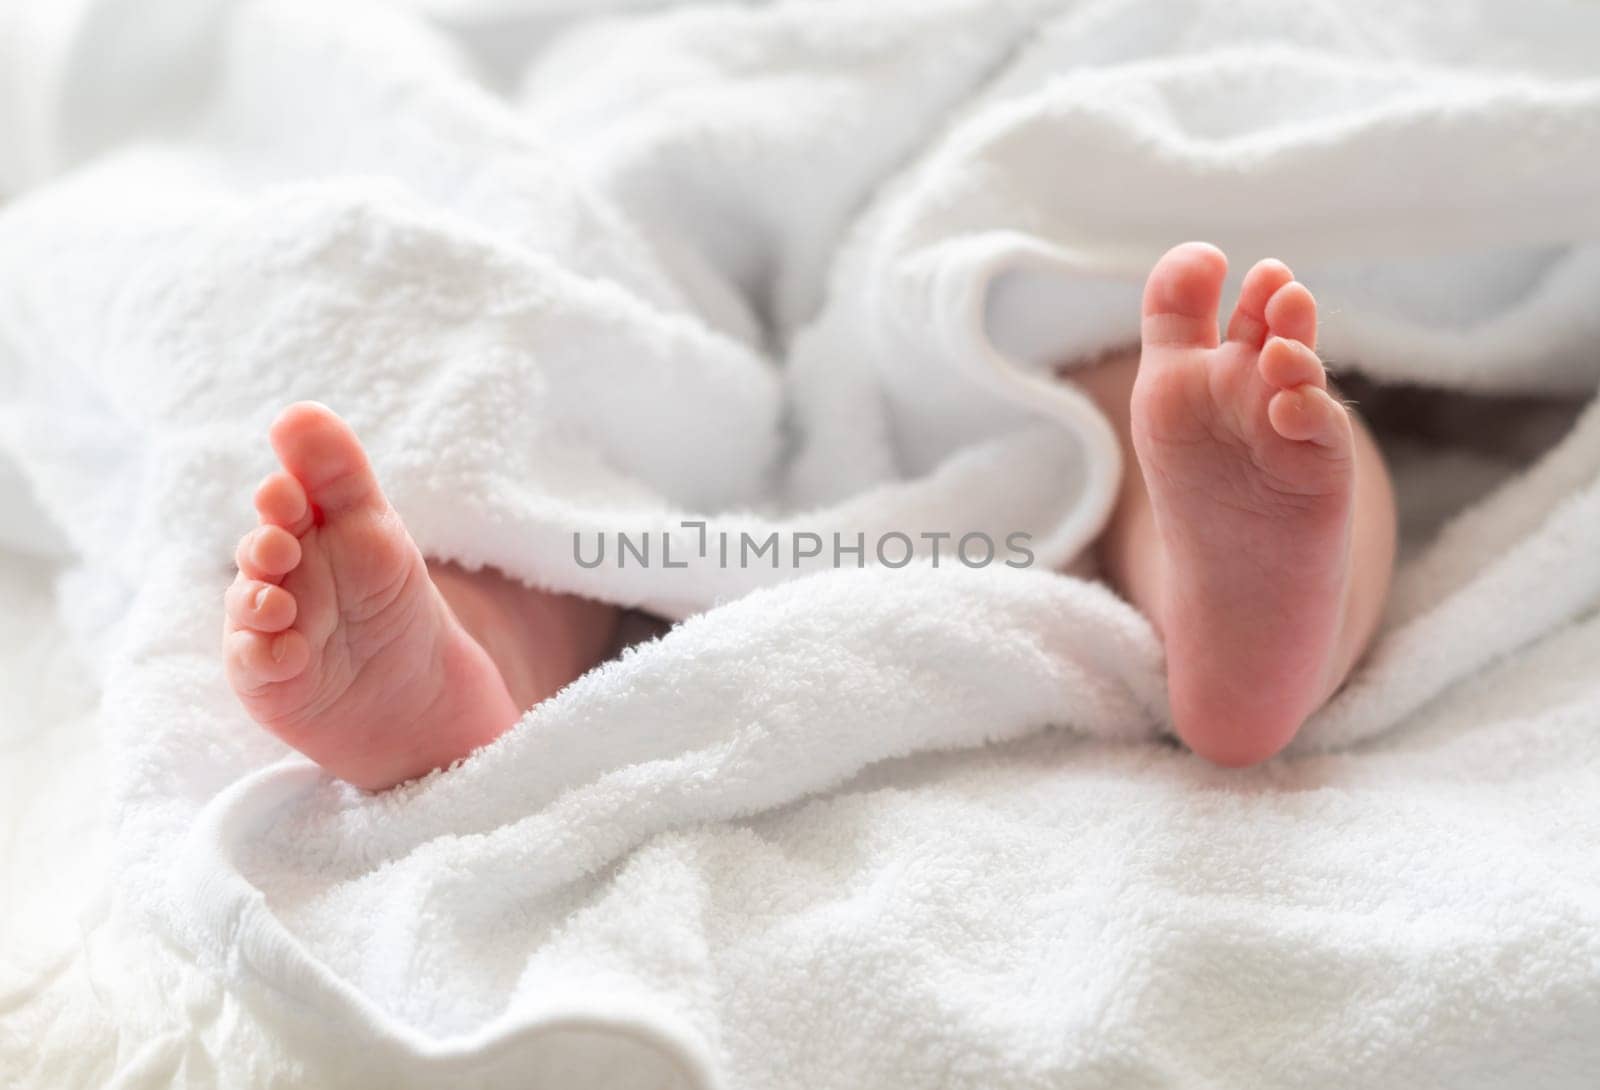 Newborn's tiny feet shielded by a white towel. Concept of nurturing and care by Mariakray